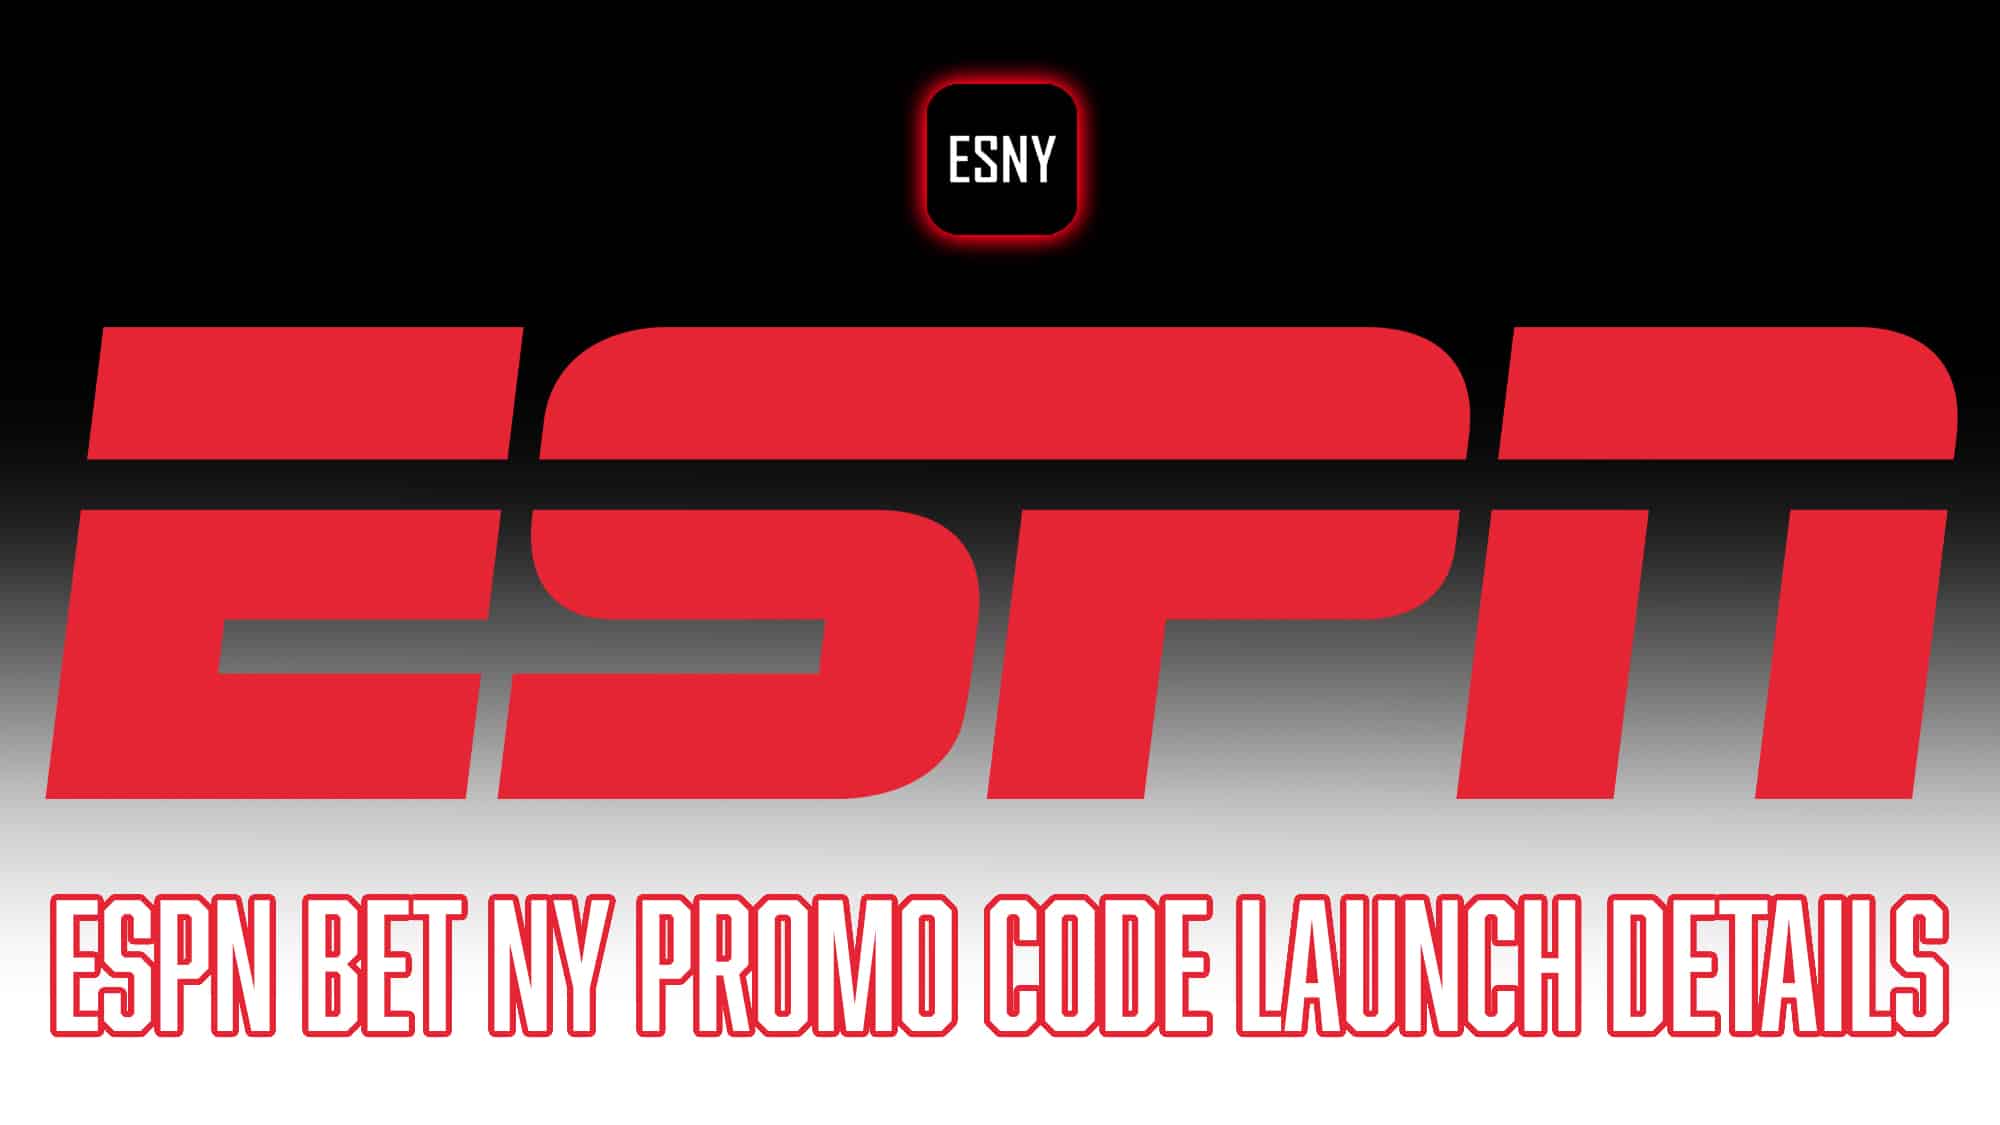 ESPN Bet NY Promo Code Launch Details